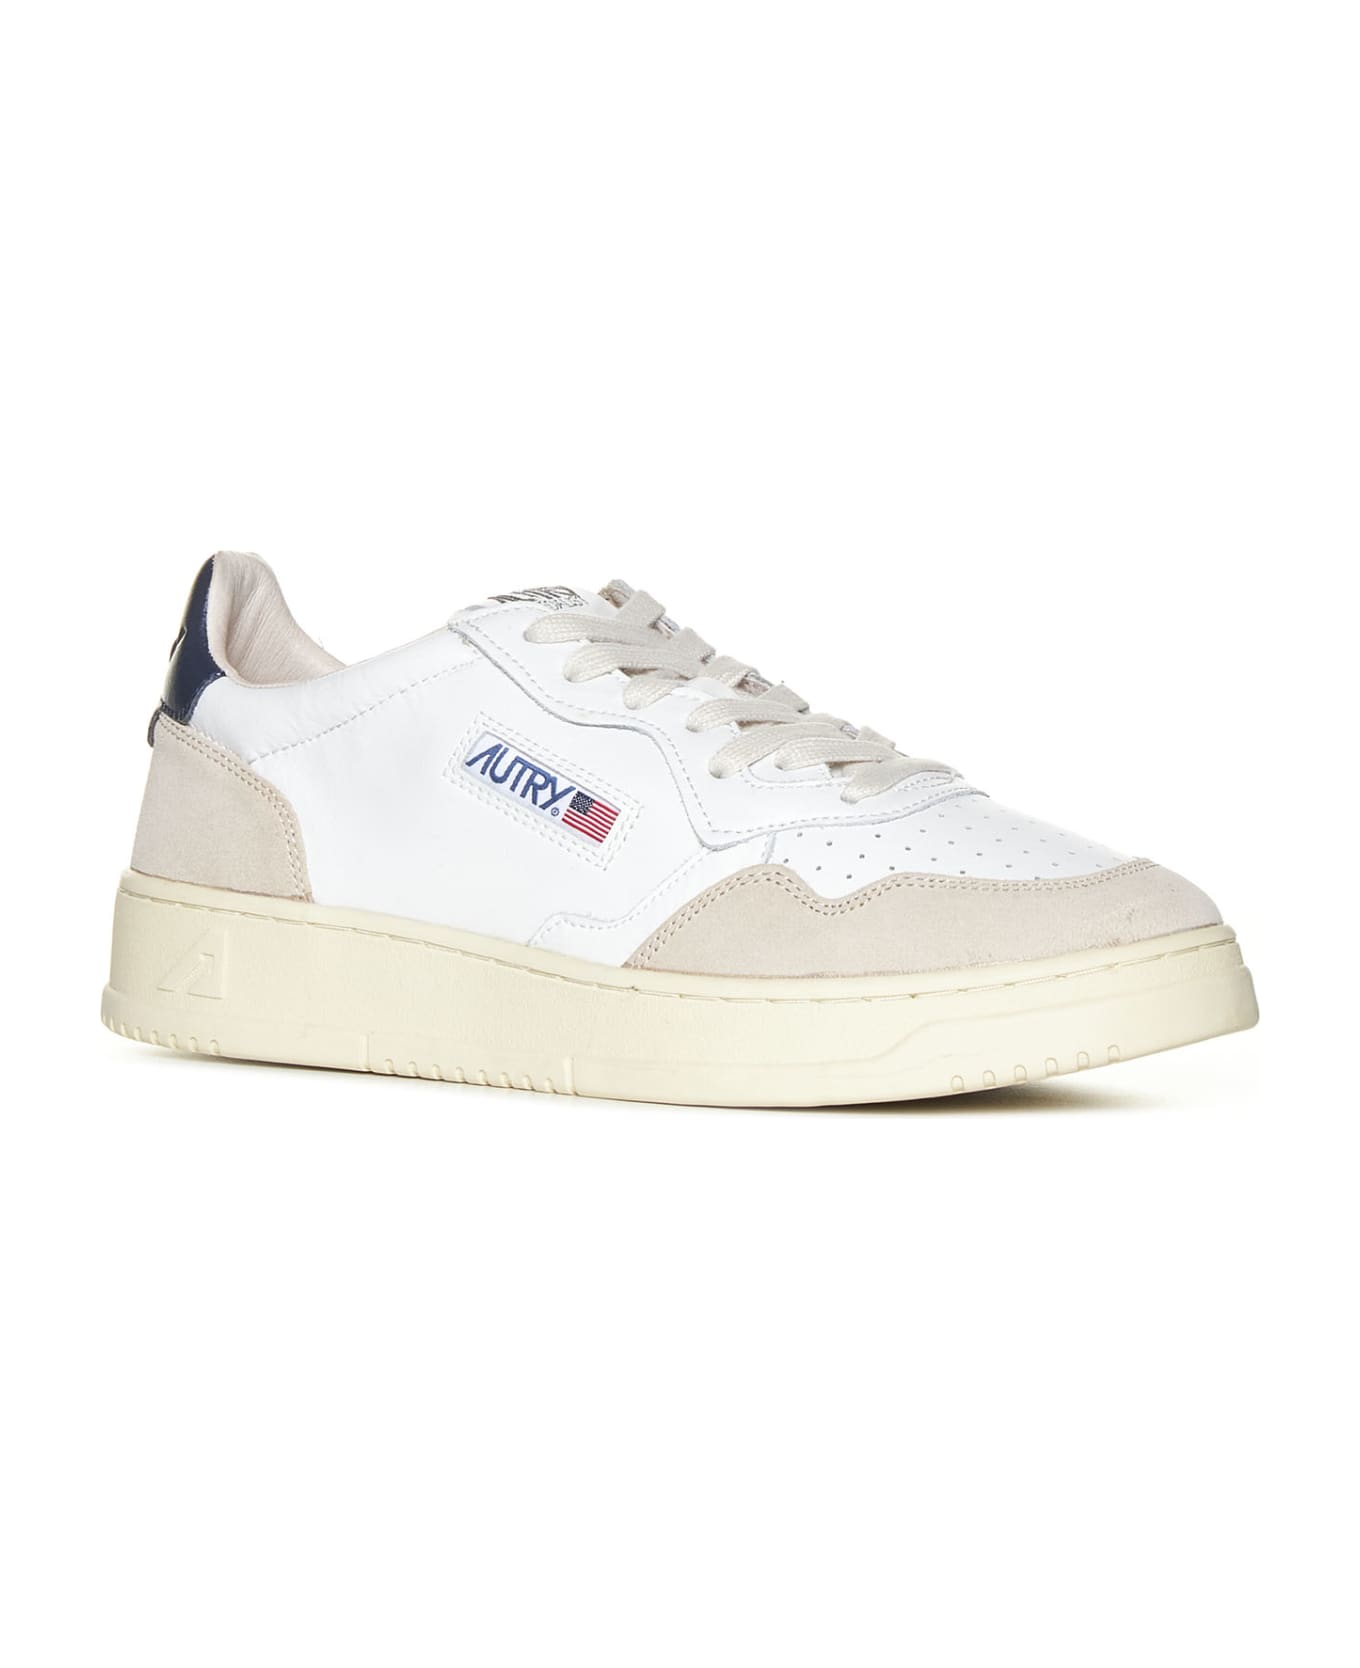 Autry Logo Patched Sneakers - White/Blue